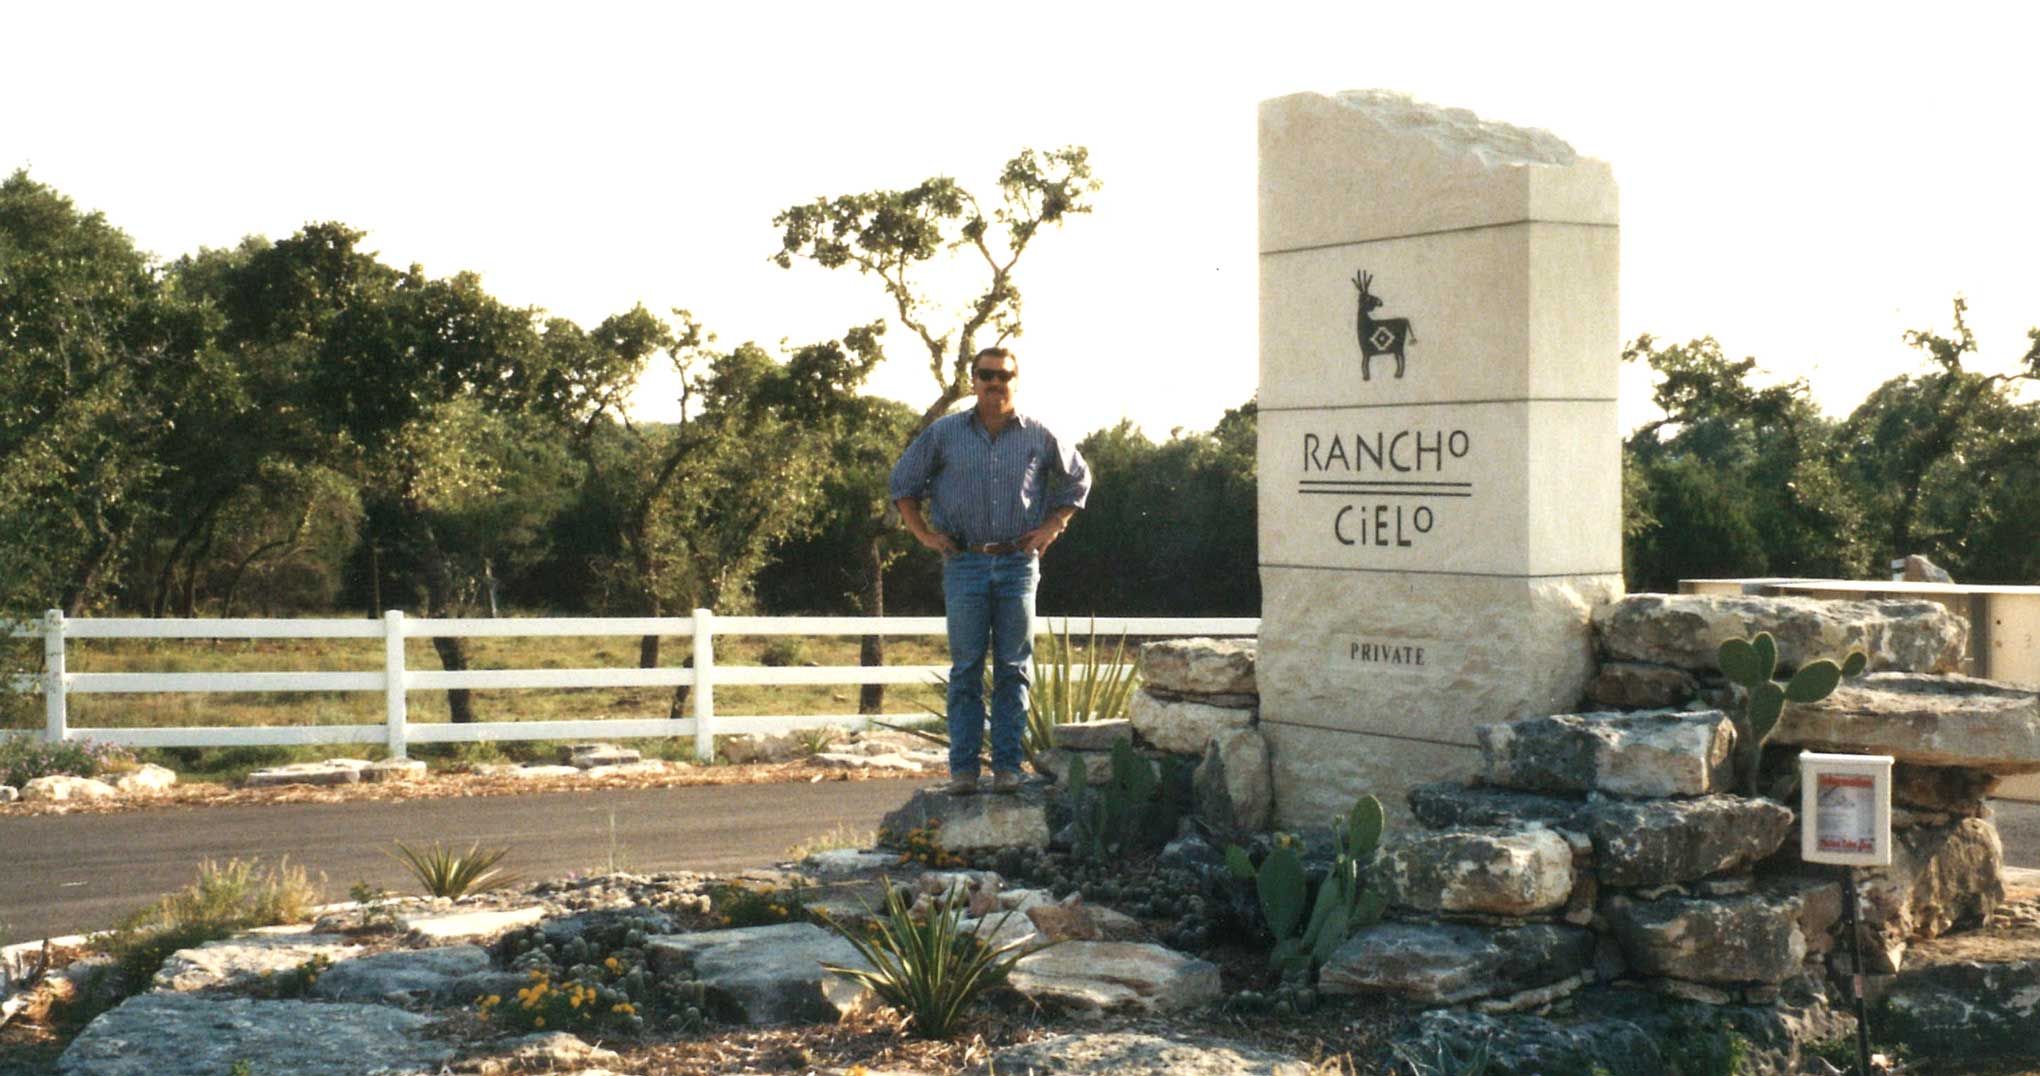 lookout-group-ranch-cielo